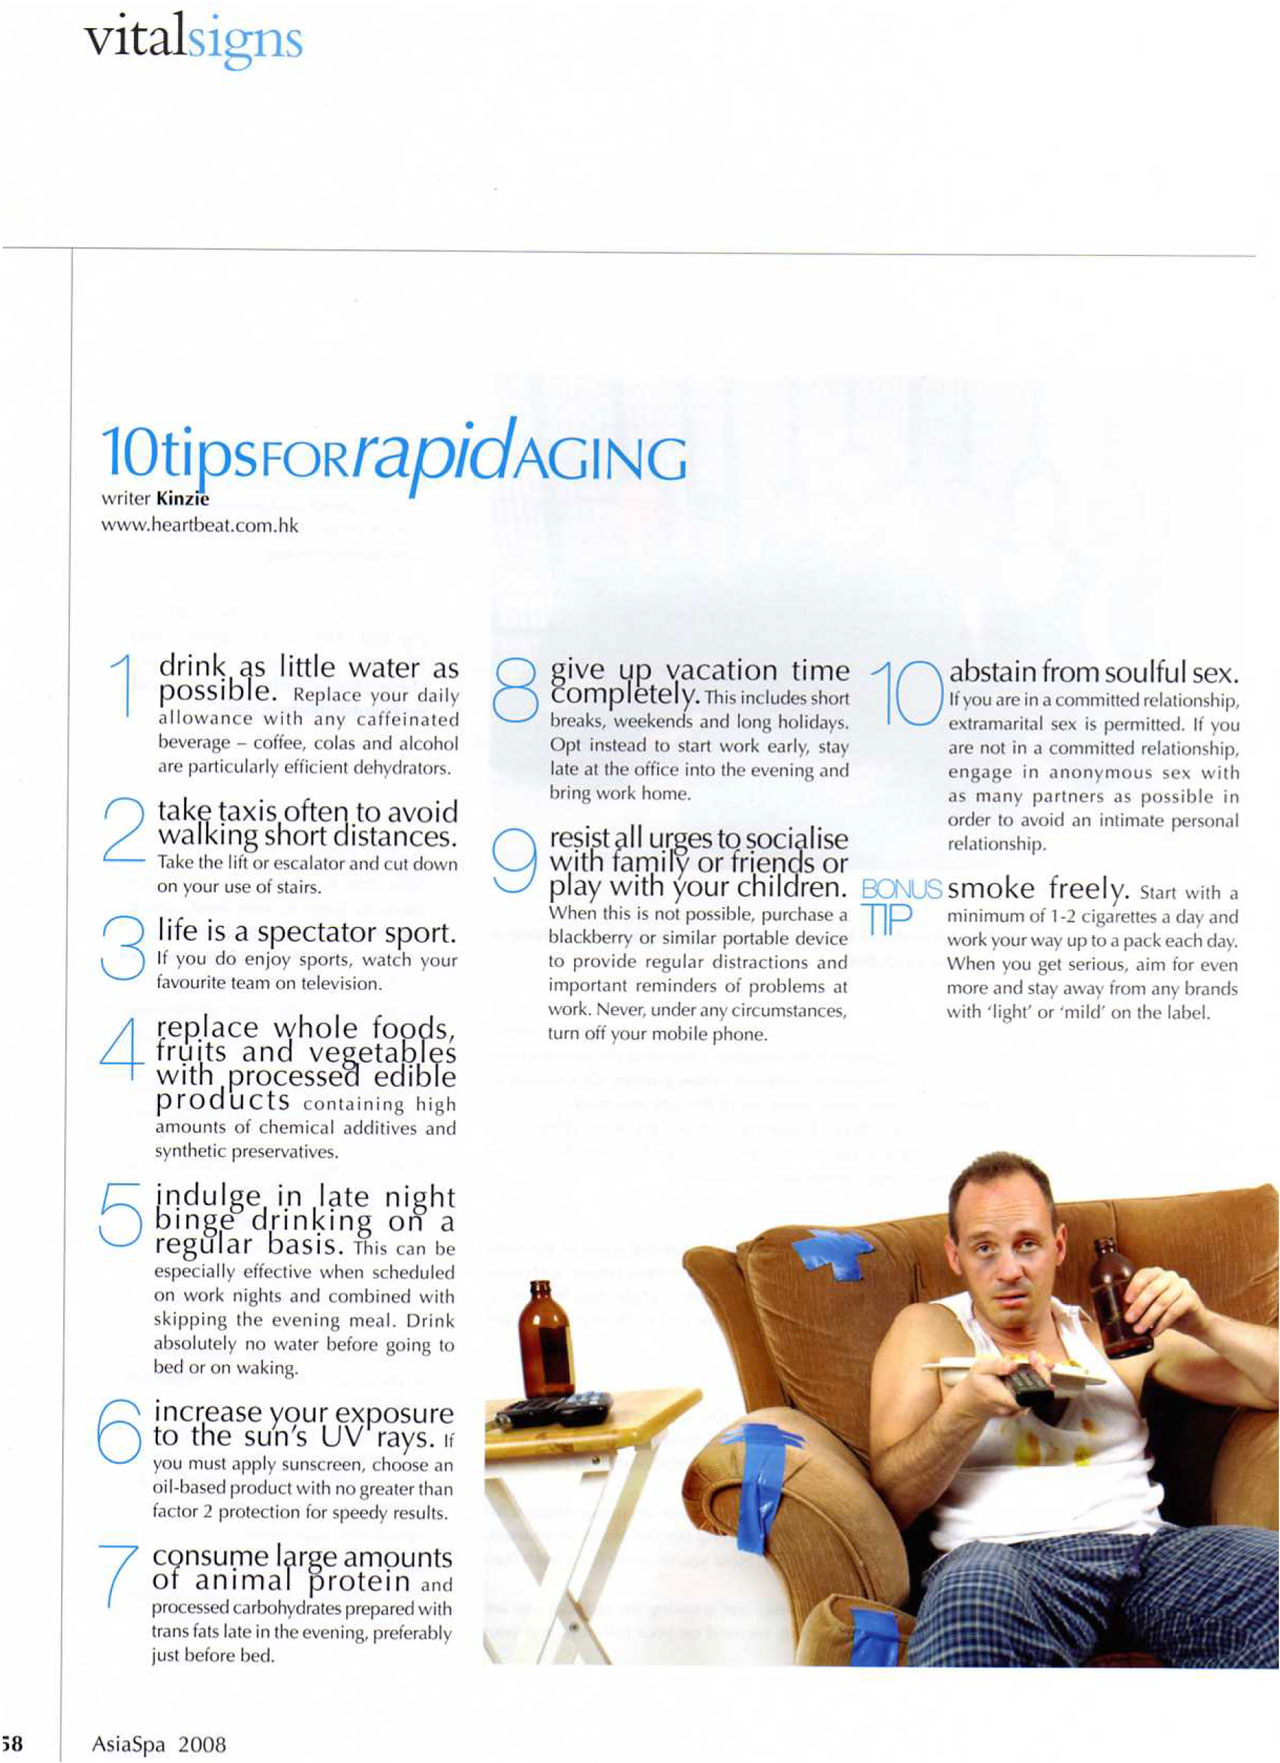 ASIASPA-2008-top-tips-aging